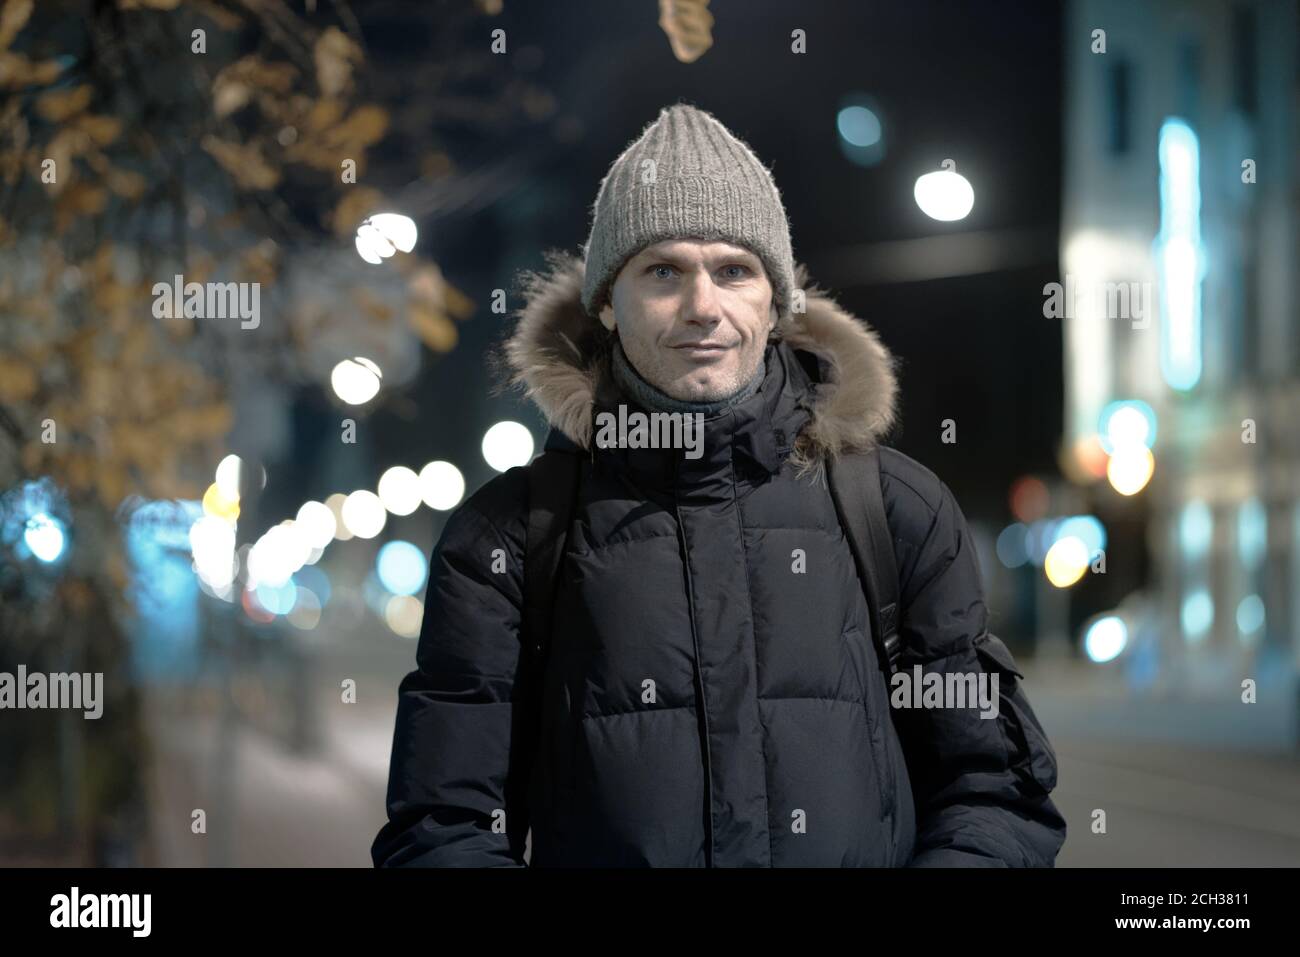 Caucasian man in winter jacket and knit hat stands on an autumn street of a night city and looking at camera Stock Photo